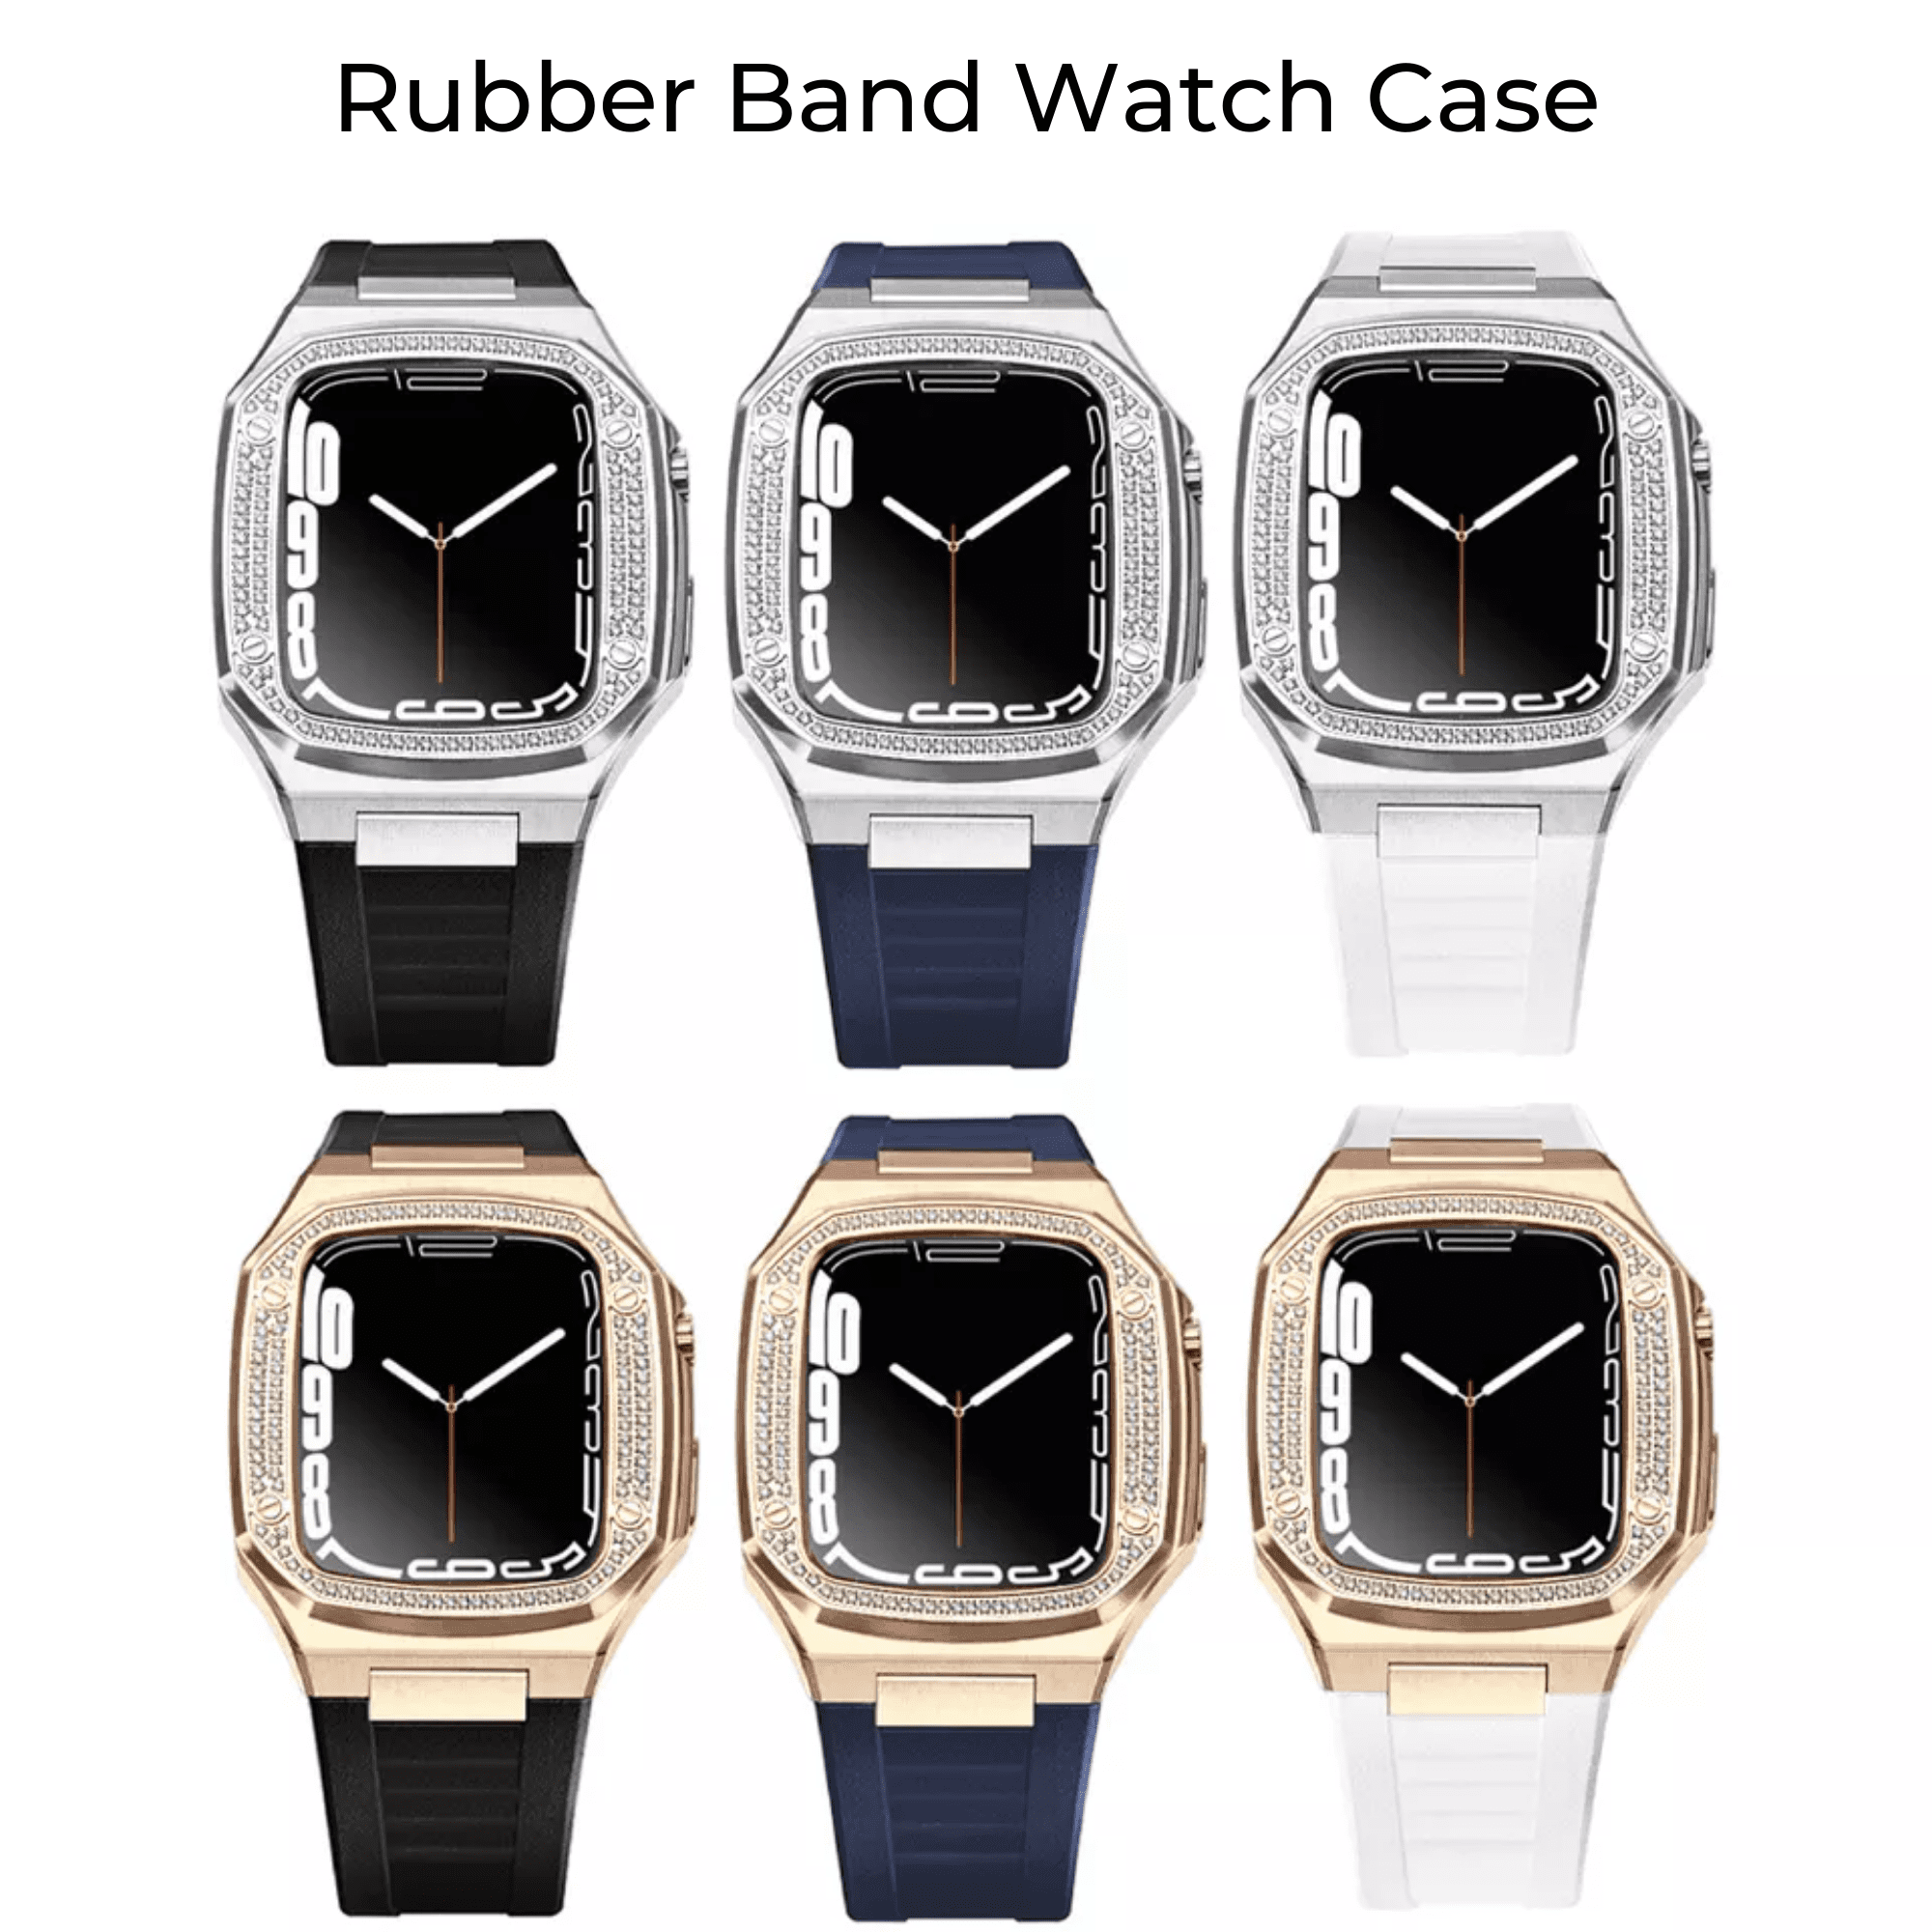 Luxury Metal Mod Kit for Apple Watch | Case with Jewels, Rubber & Stainless Steel Straps | Apple Watch SE/3/4/5/6 accessory - 45 mm| Rosè Gold case - Black Band mod kits india dream watches apple watch